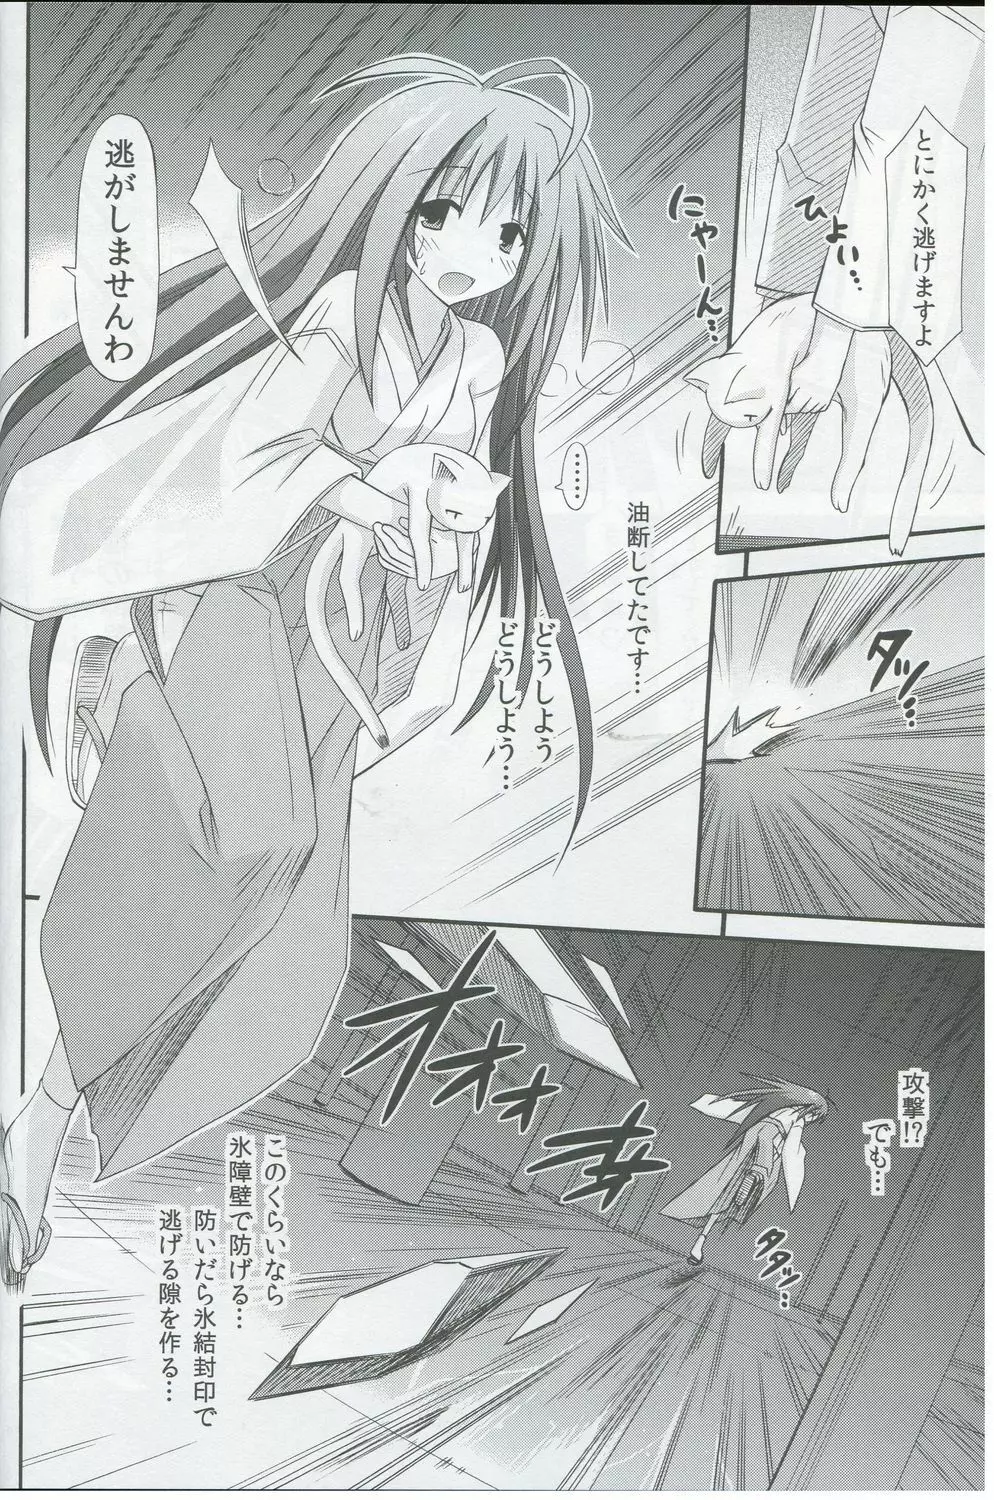 freeze氷結の巫女 -覚醒- - page5